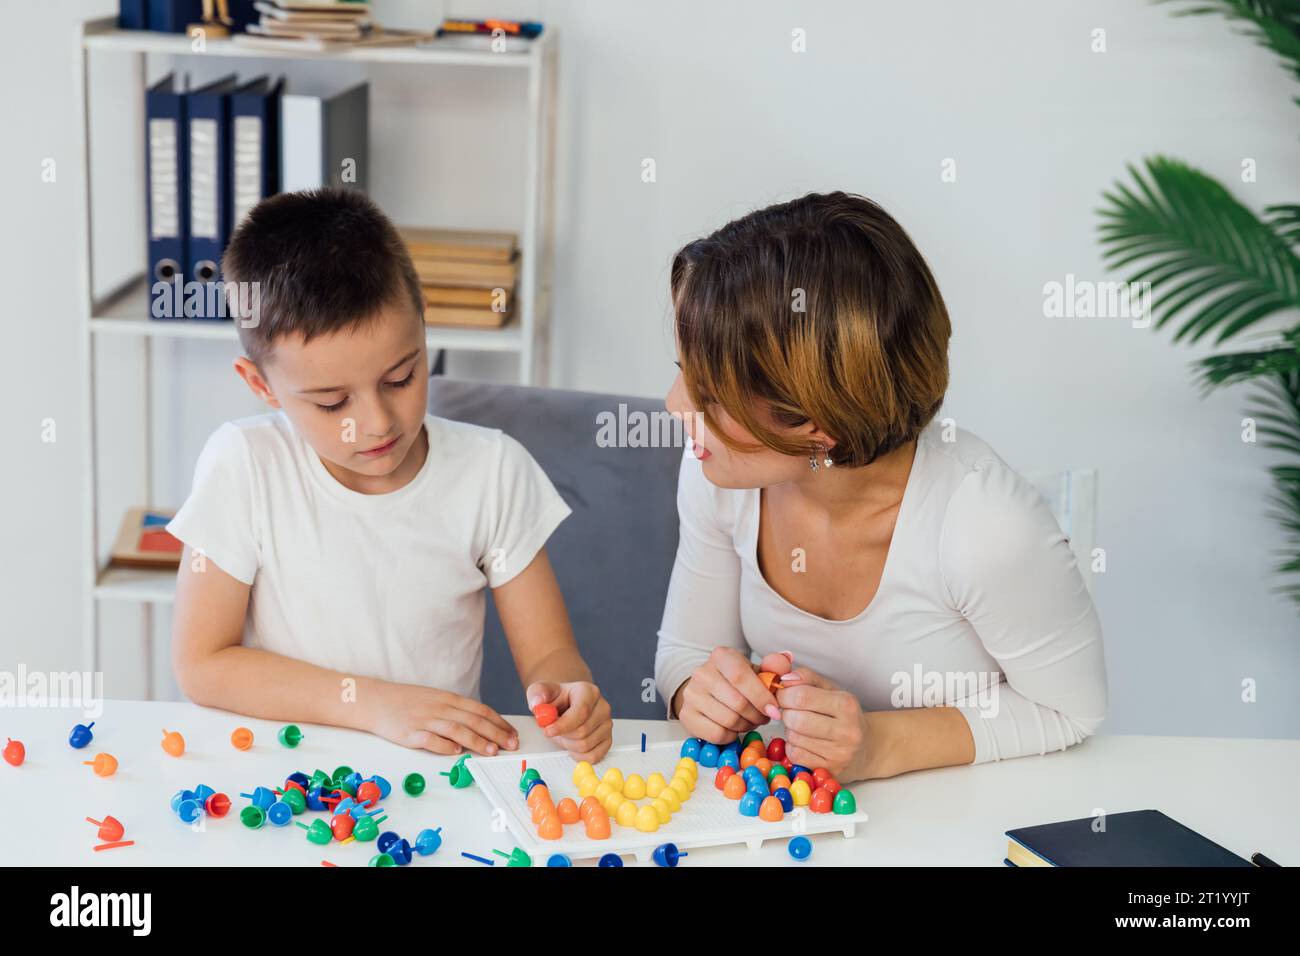 for children a child psychologist is engaged with a boy in the office of educational games Stock Photo